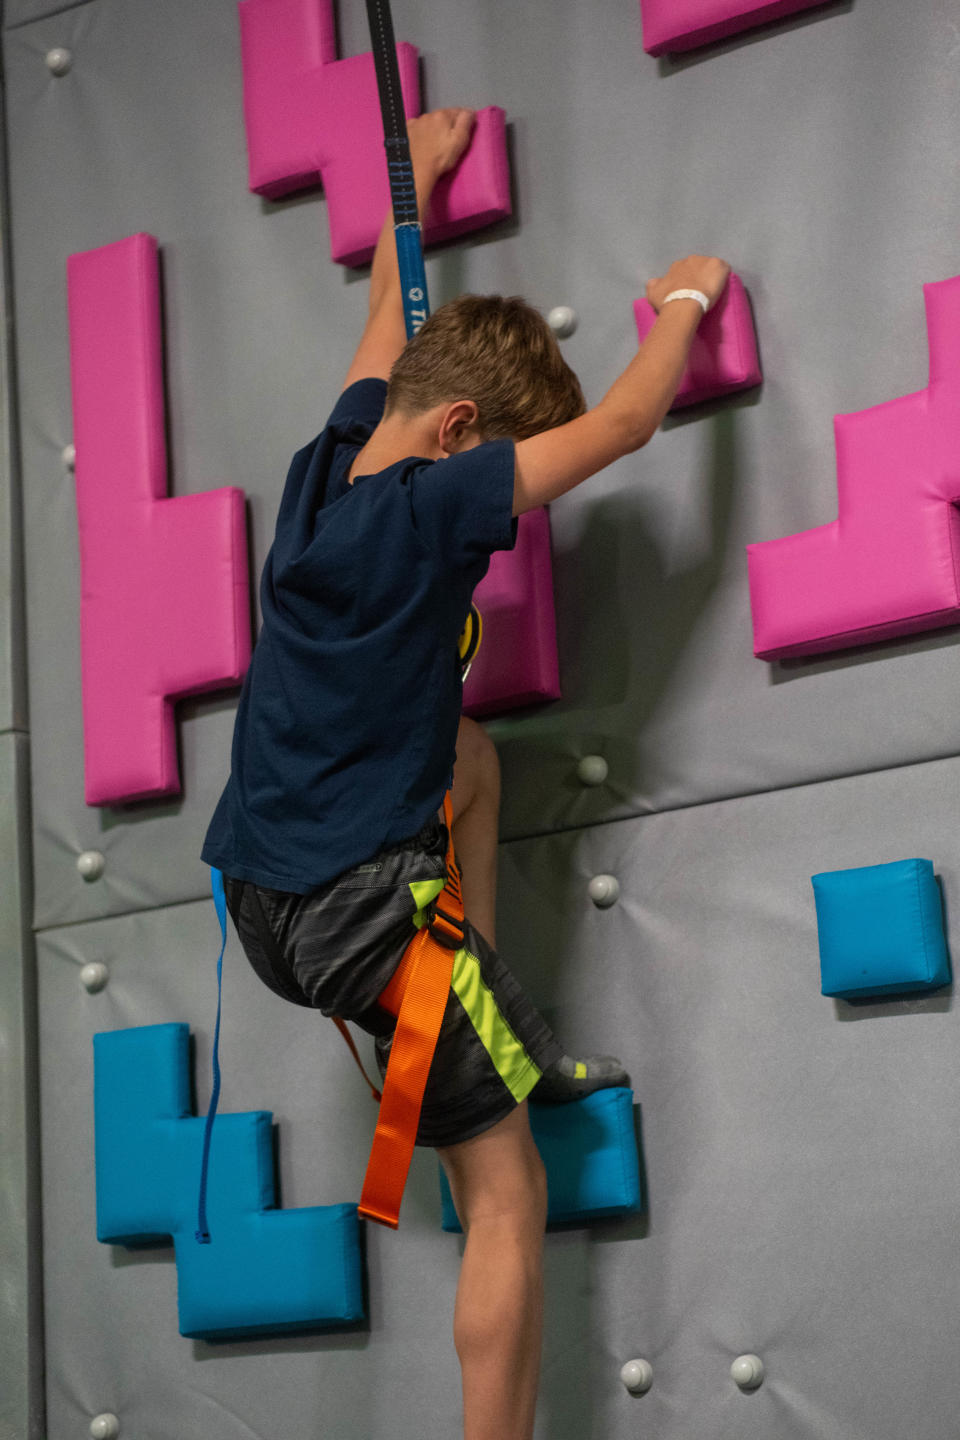 A young boy scales the rock climbing wall at Urban Air Adventure Park in Amarillo.